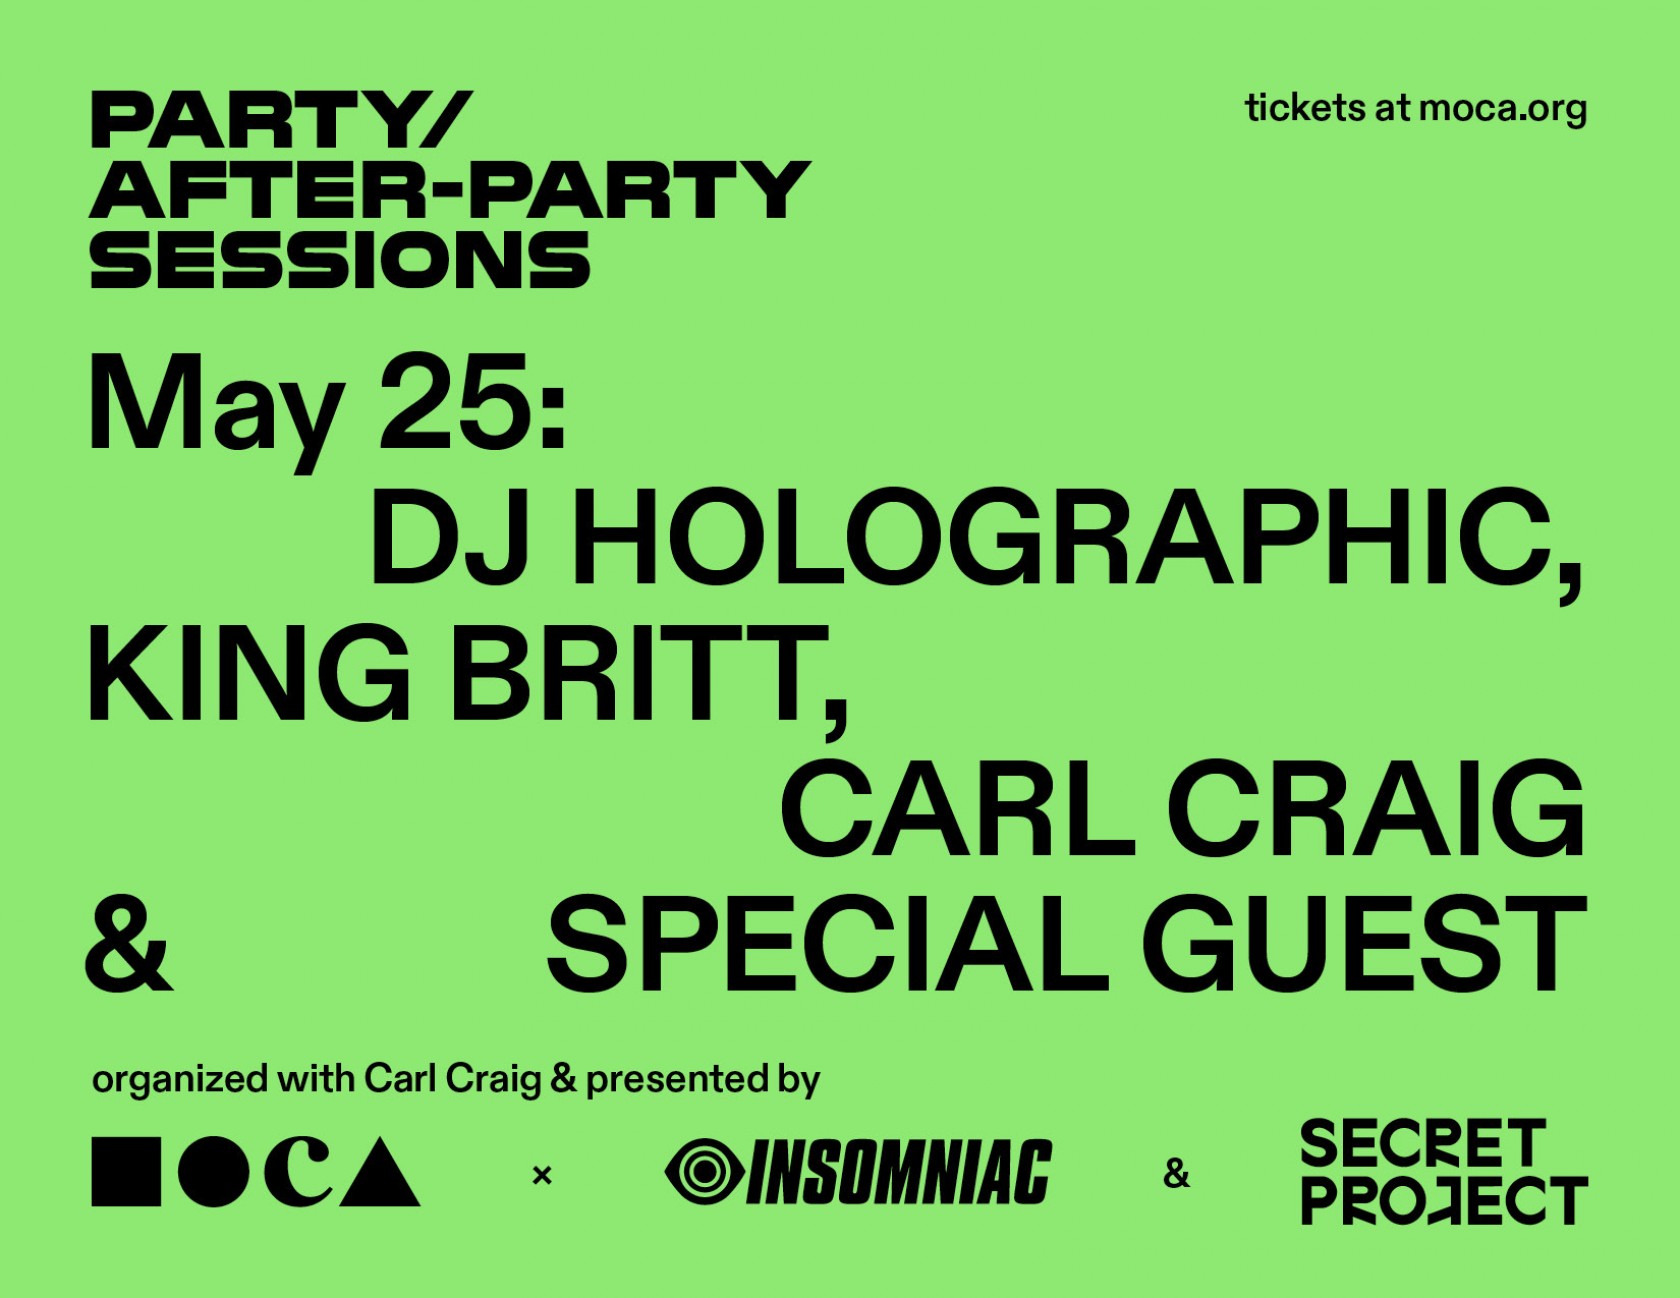 MOCA x Insomniac & Secret Project Present Party/After-Party Sessions